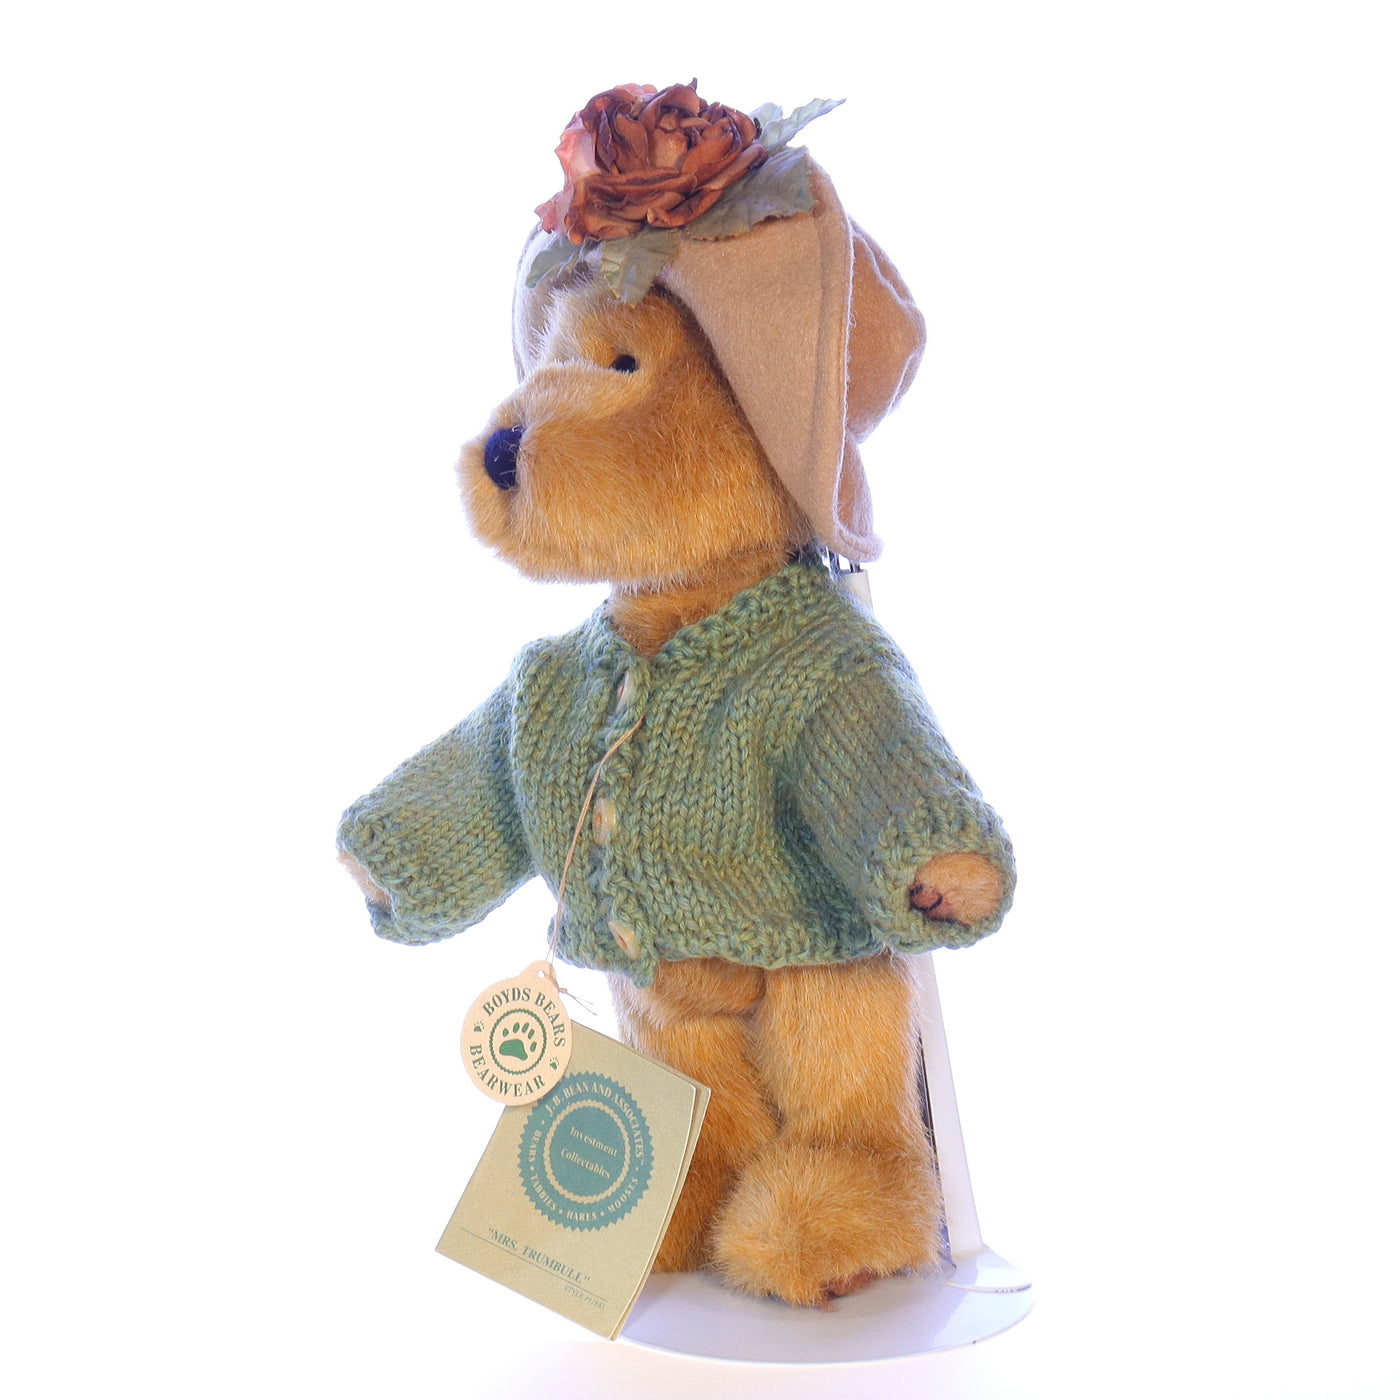 Boyds_Bears_and_Friends_91833_Mrs_Trumbull_Fashion_Stuffed_Animal_1985 Front Left View